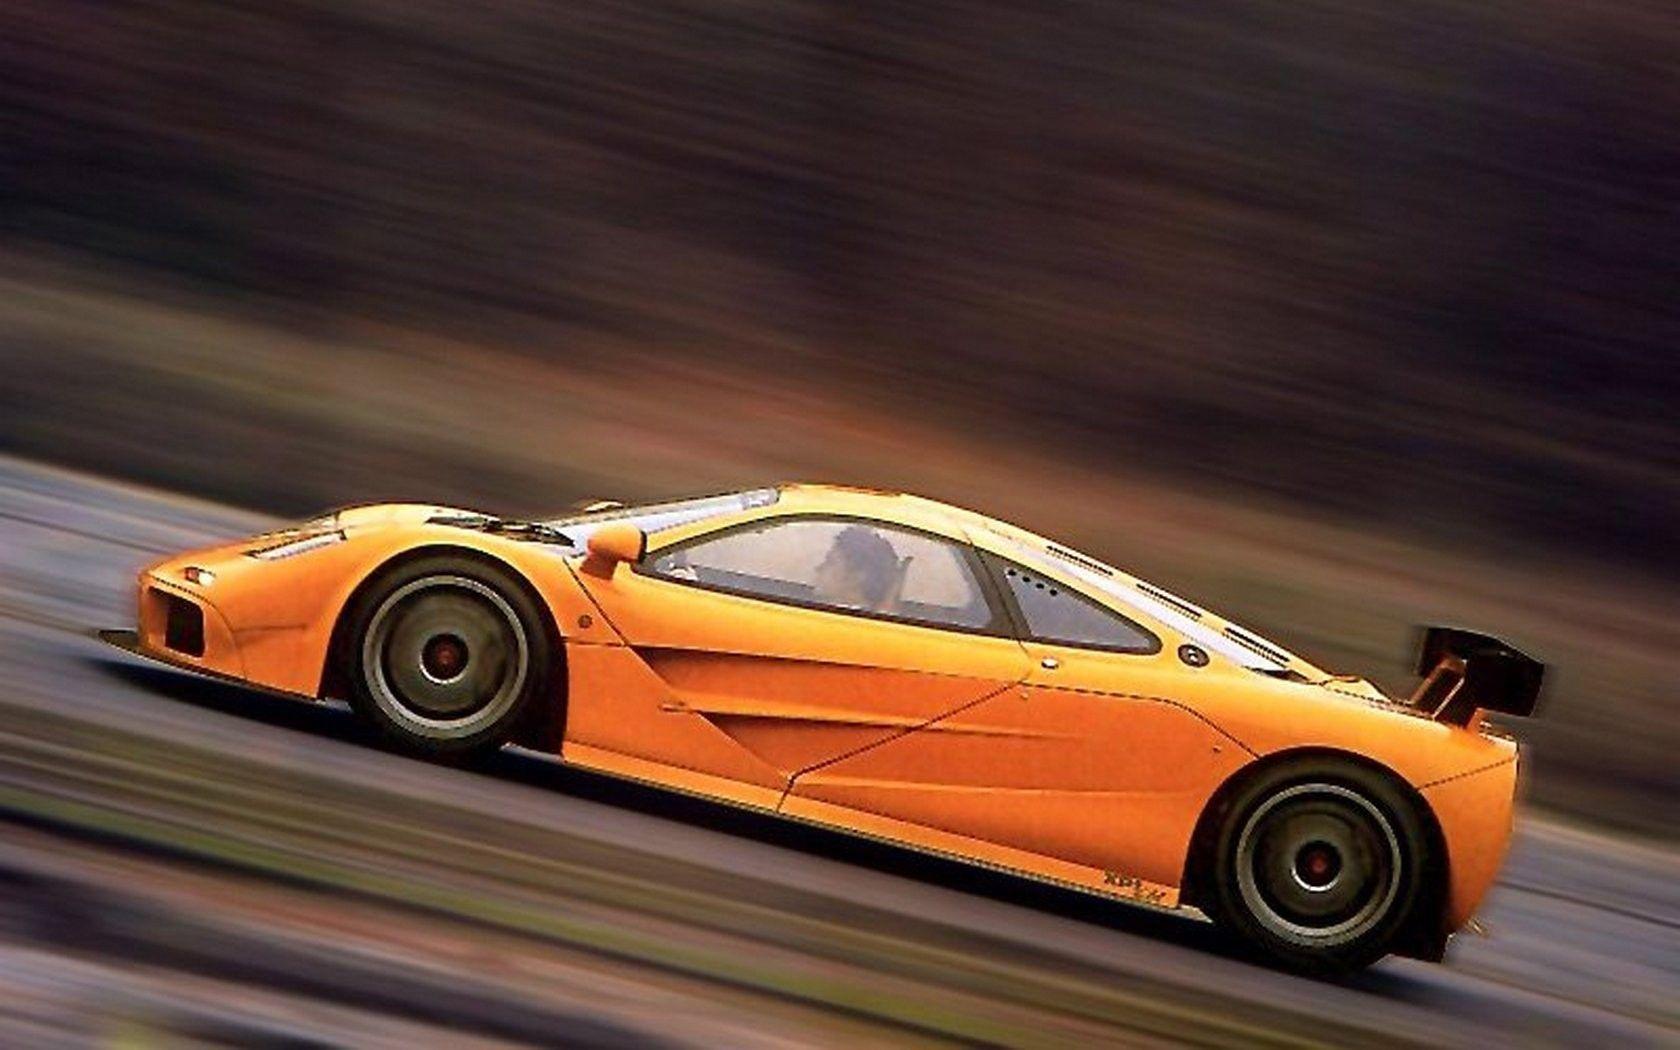 enjoy our wallpaper of the month mclaren f1 lm Car Tuning